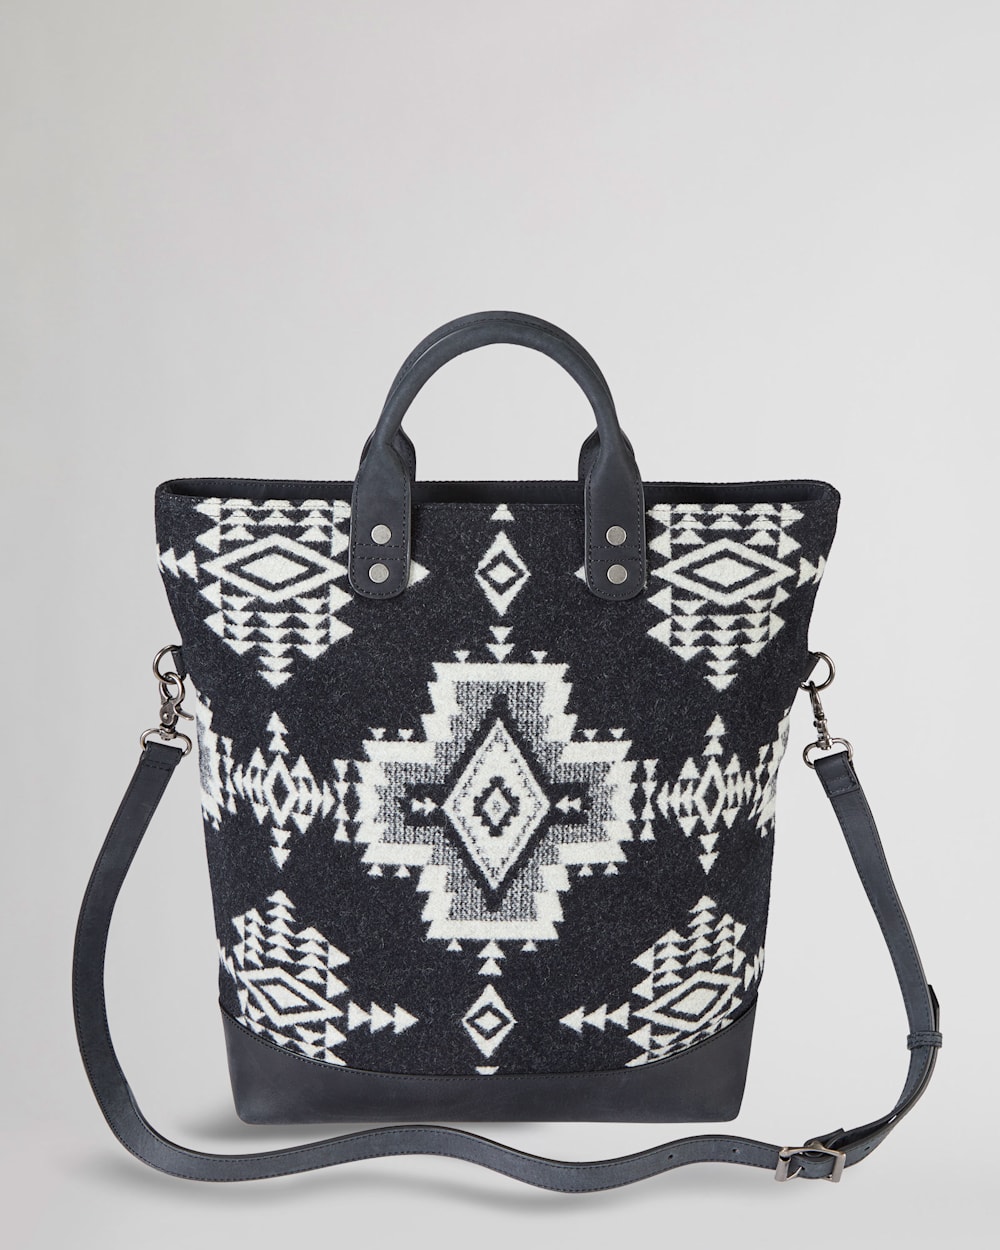 ALTERNATE VIEW OF ROCK POINT LONG TOTE IN BLACK image number 2